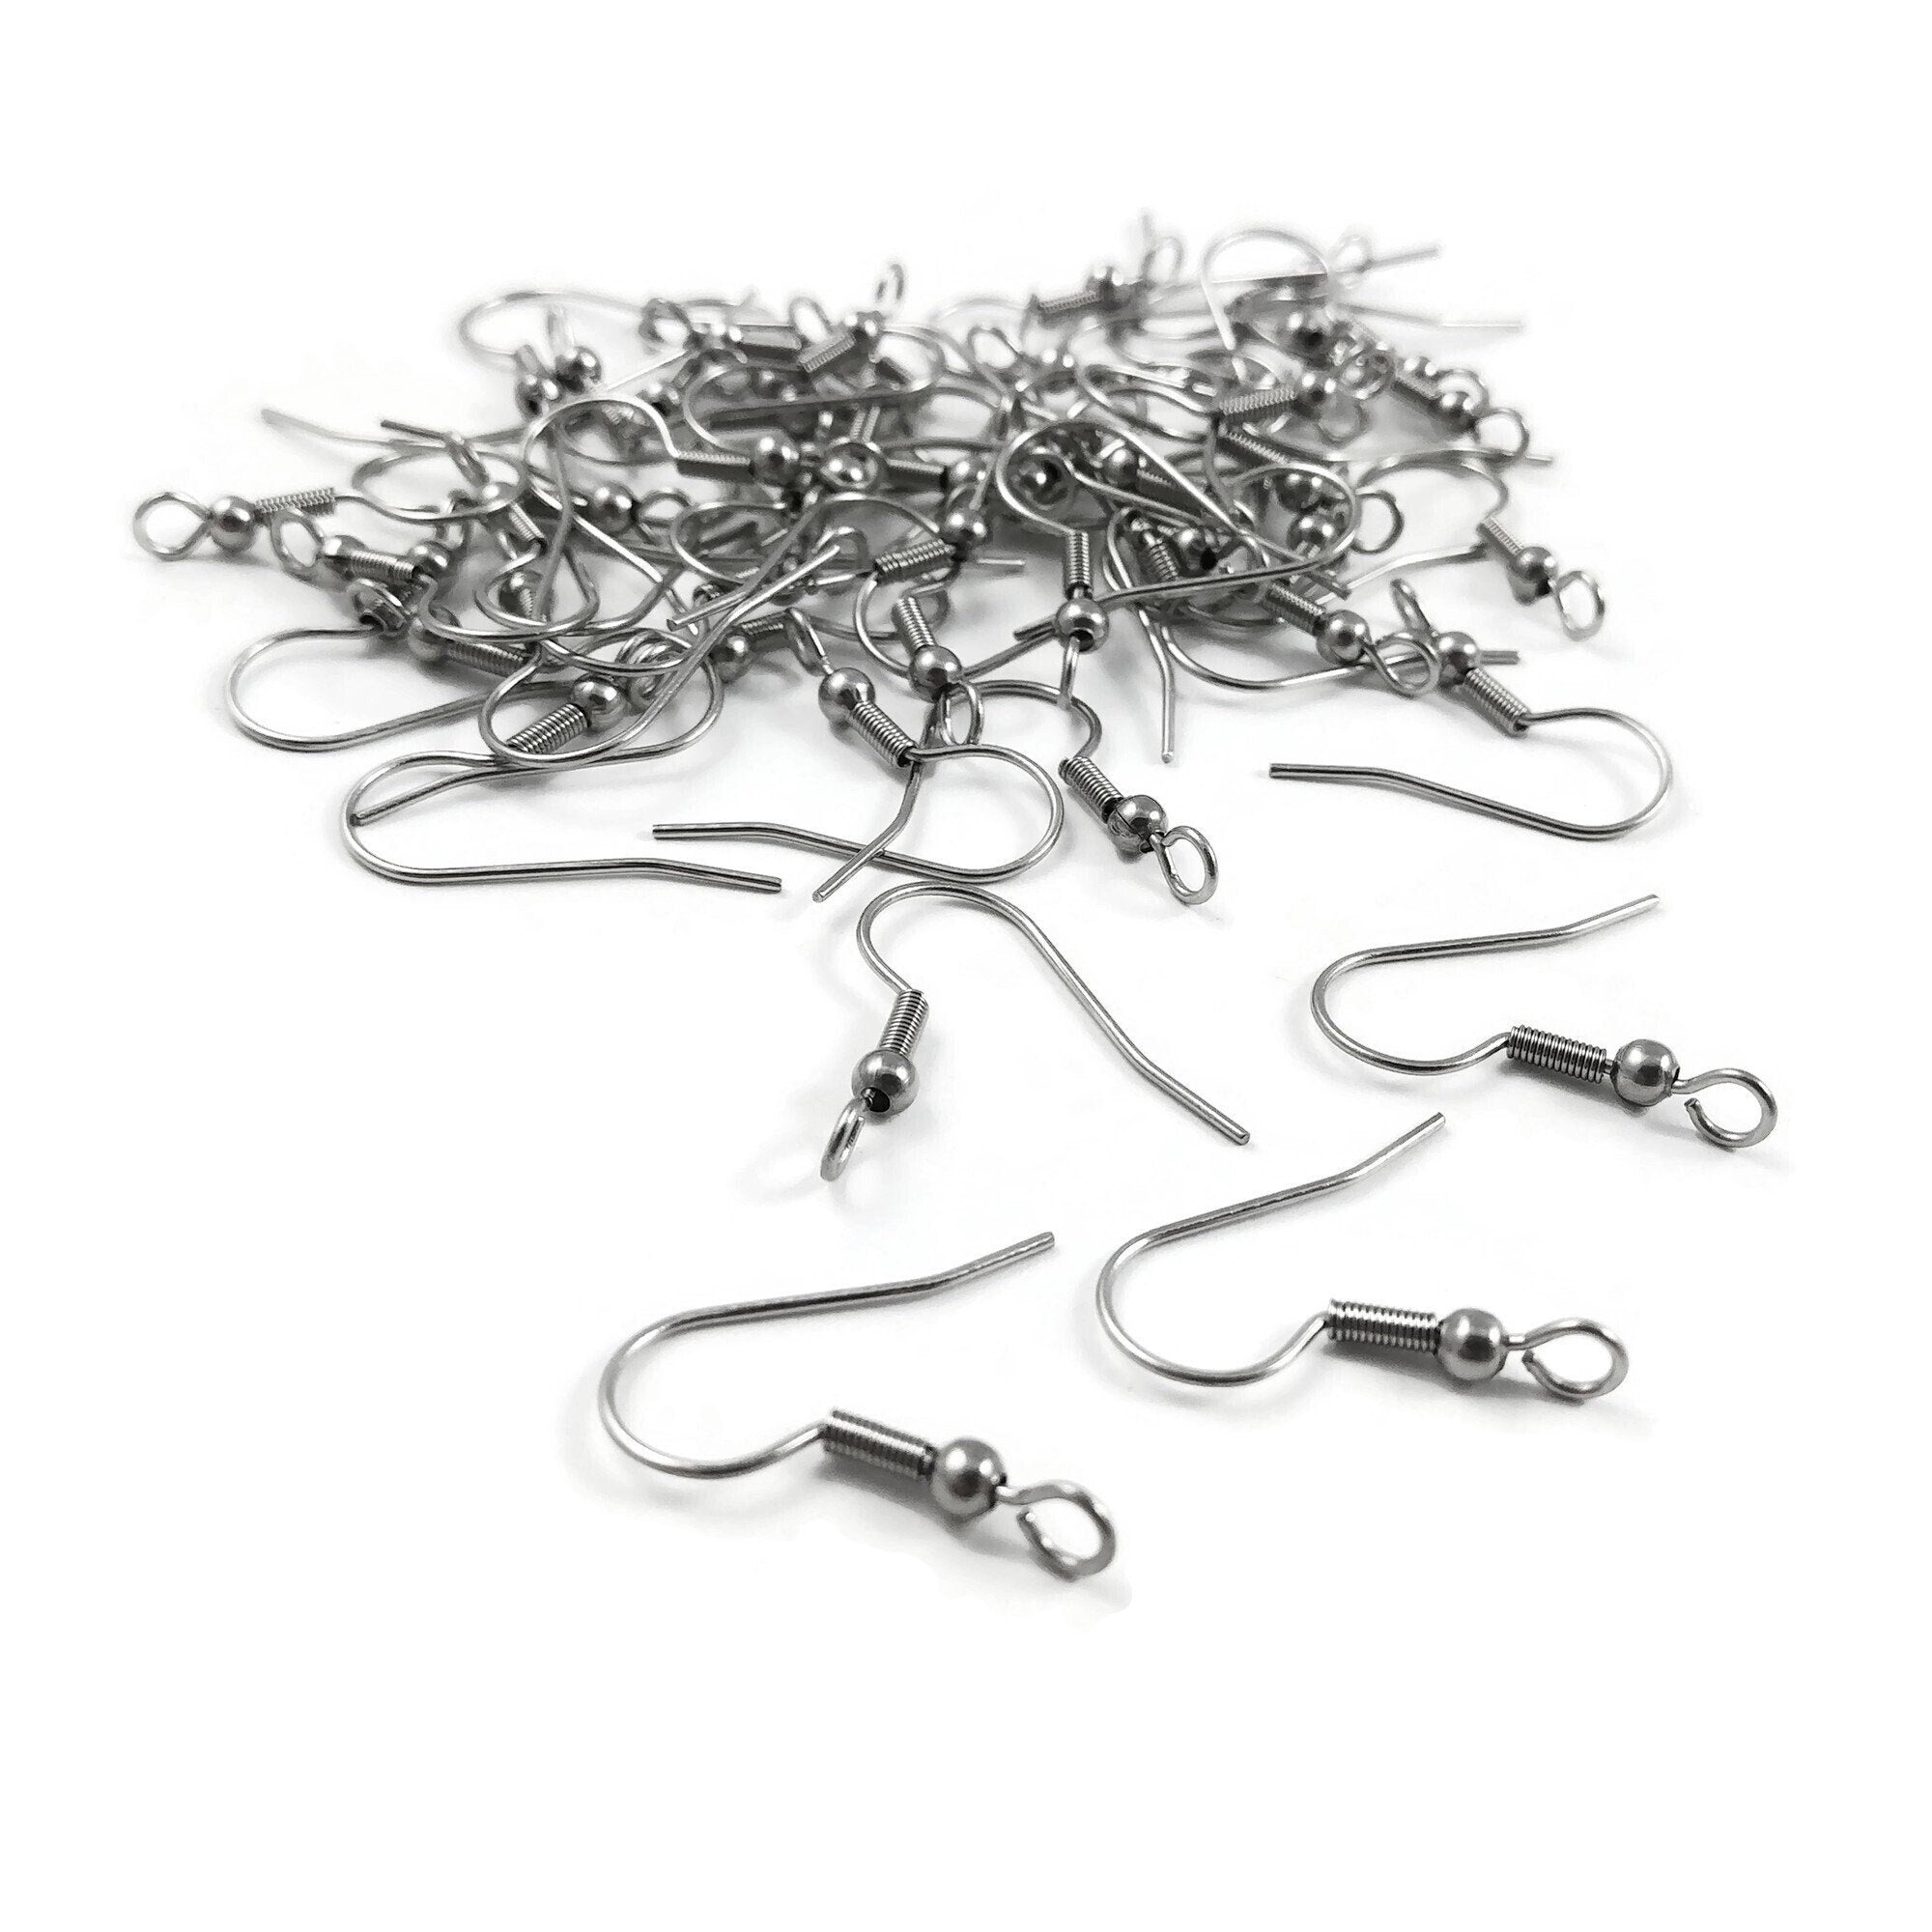 Stainless steel ear wires, Other side loop earring hooks 50 pcs (25 pa